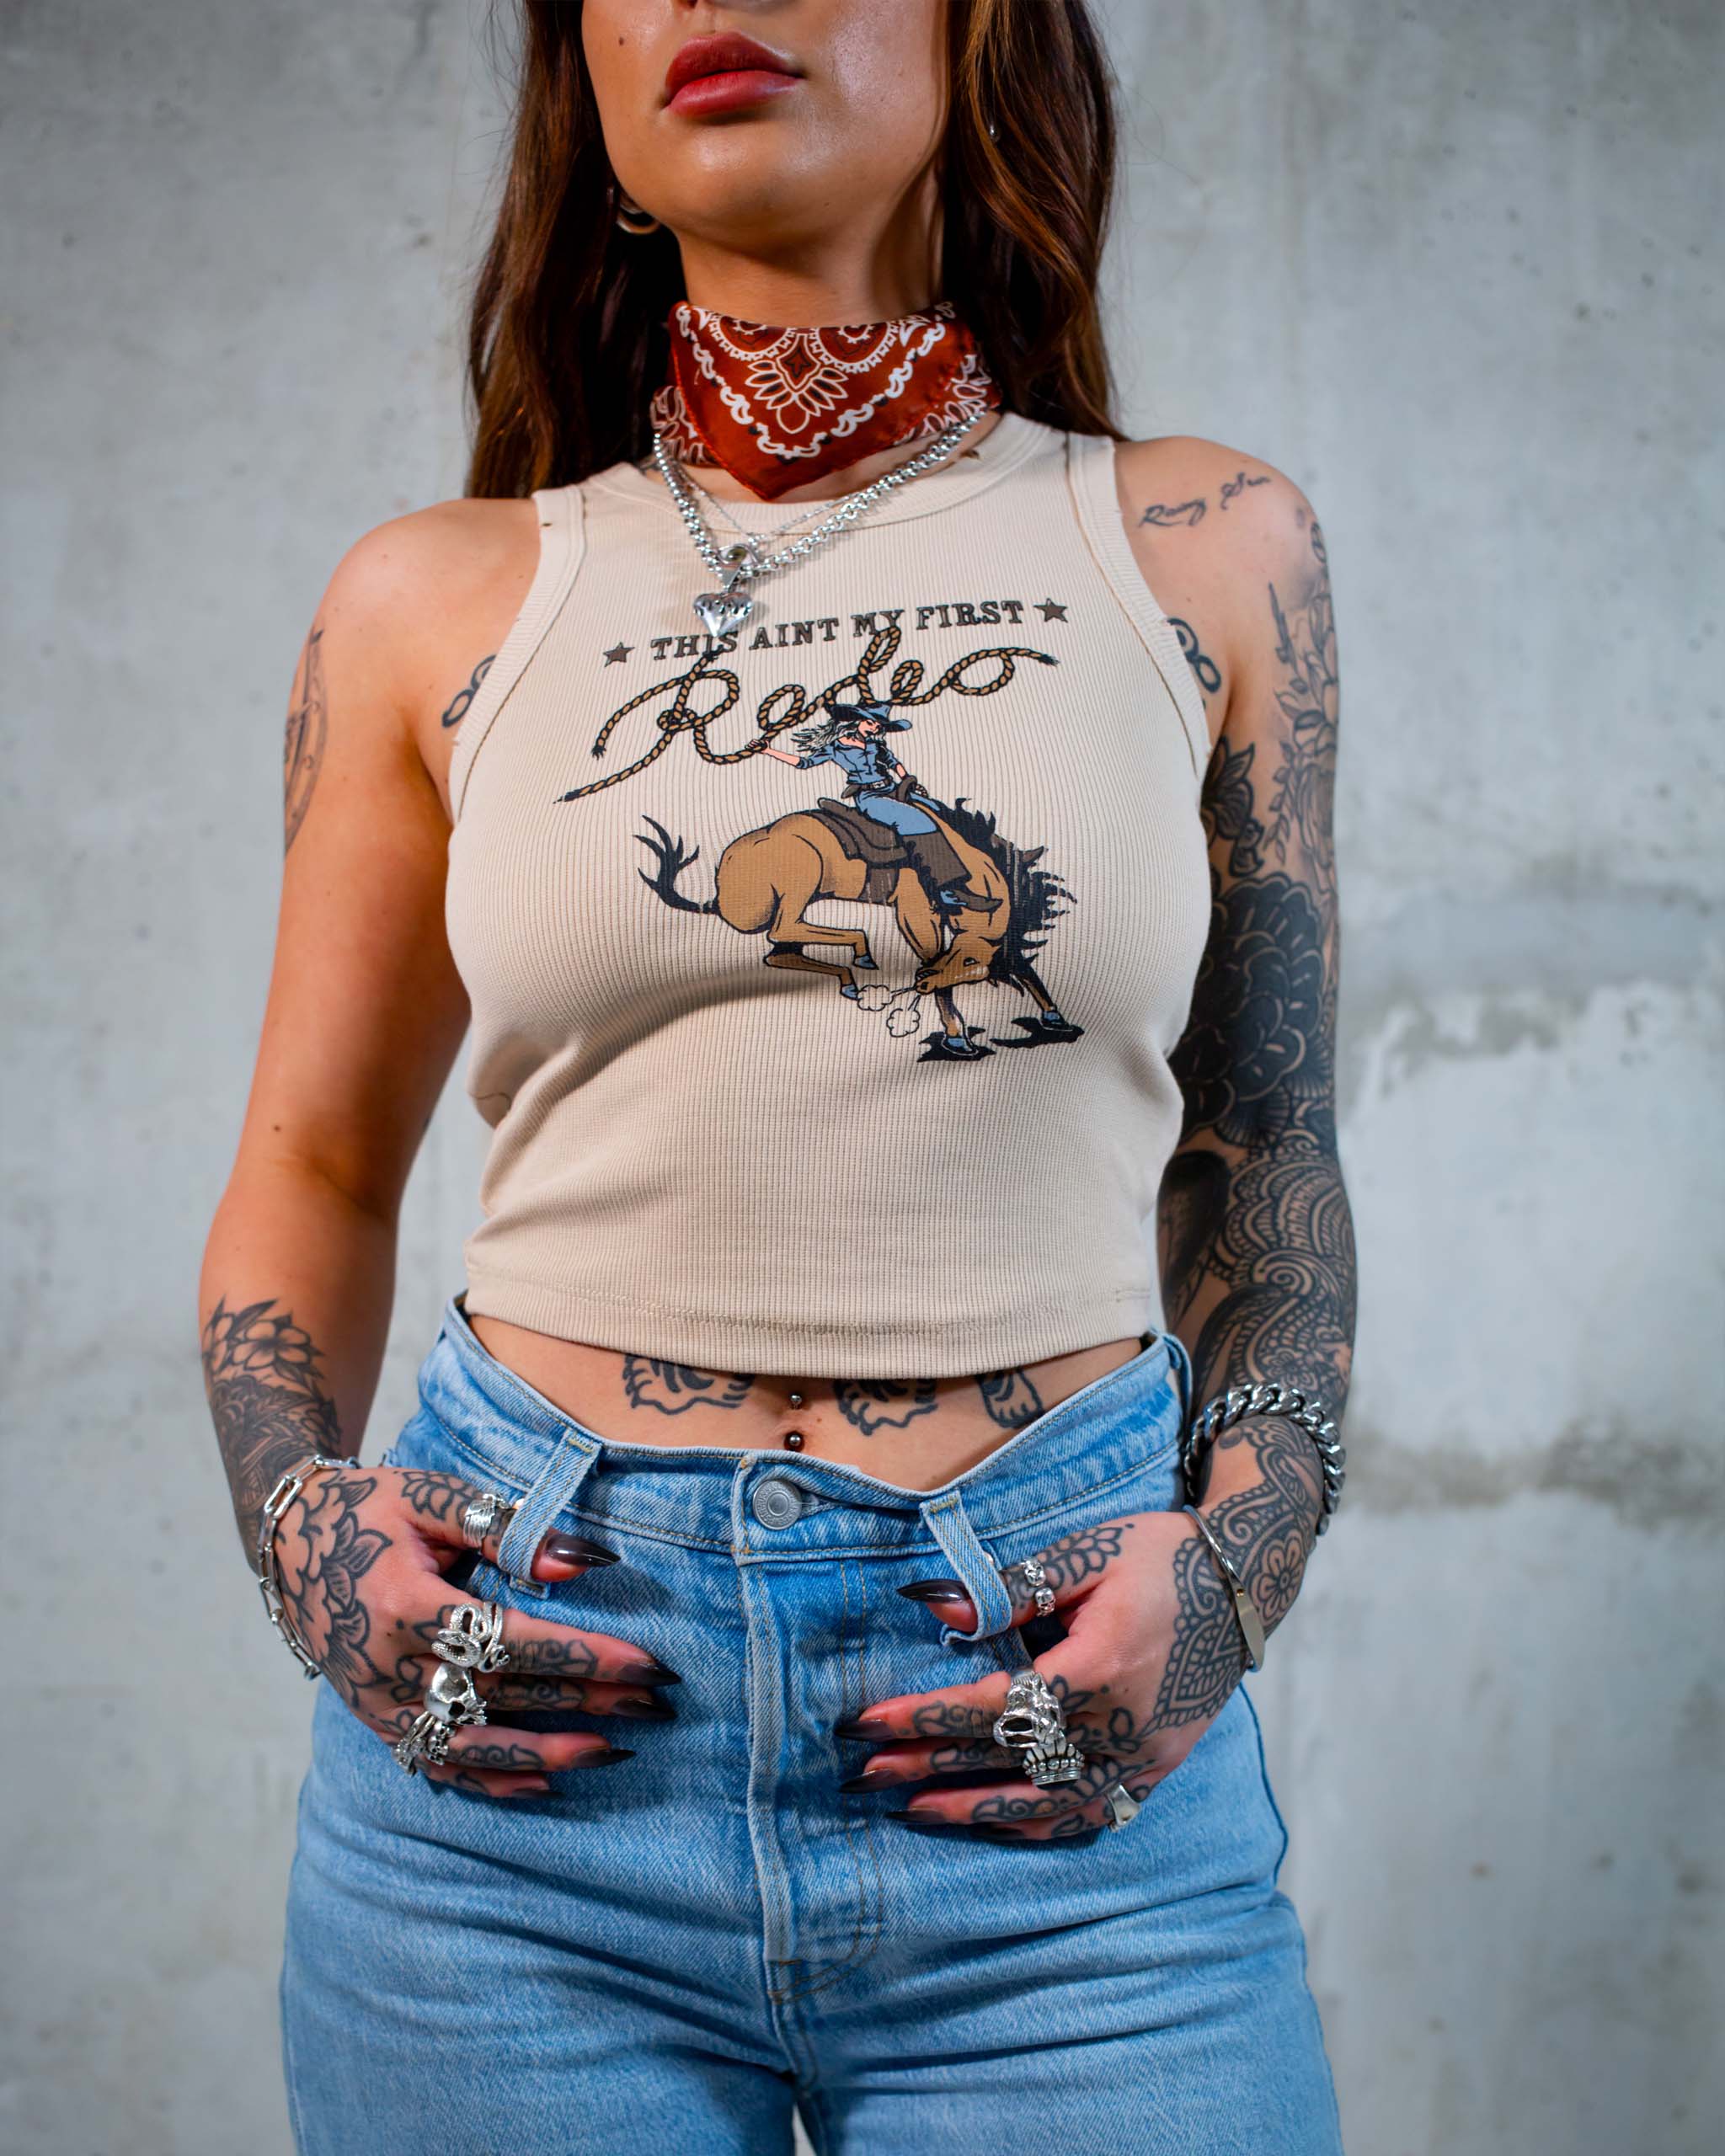 This Ain't My First Rodeo tank top by Sleazy Rider, featuring a cowgirl on a bucking wild west horse.